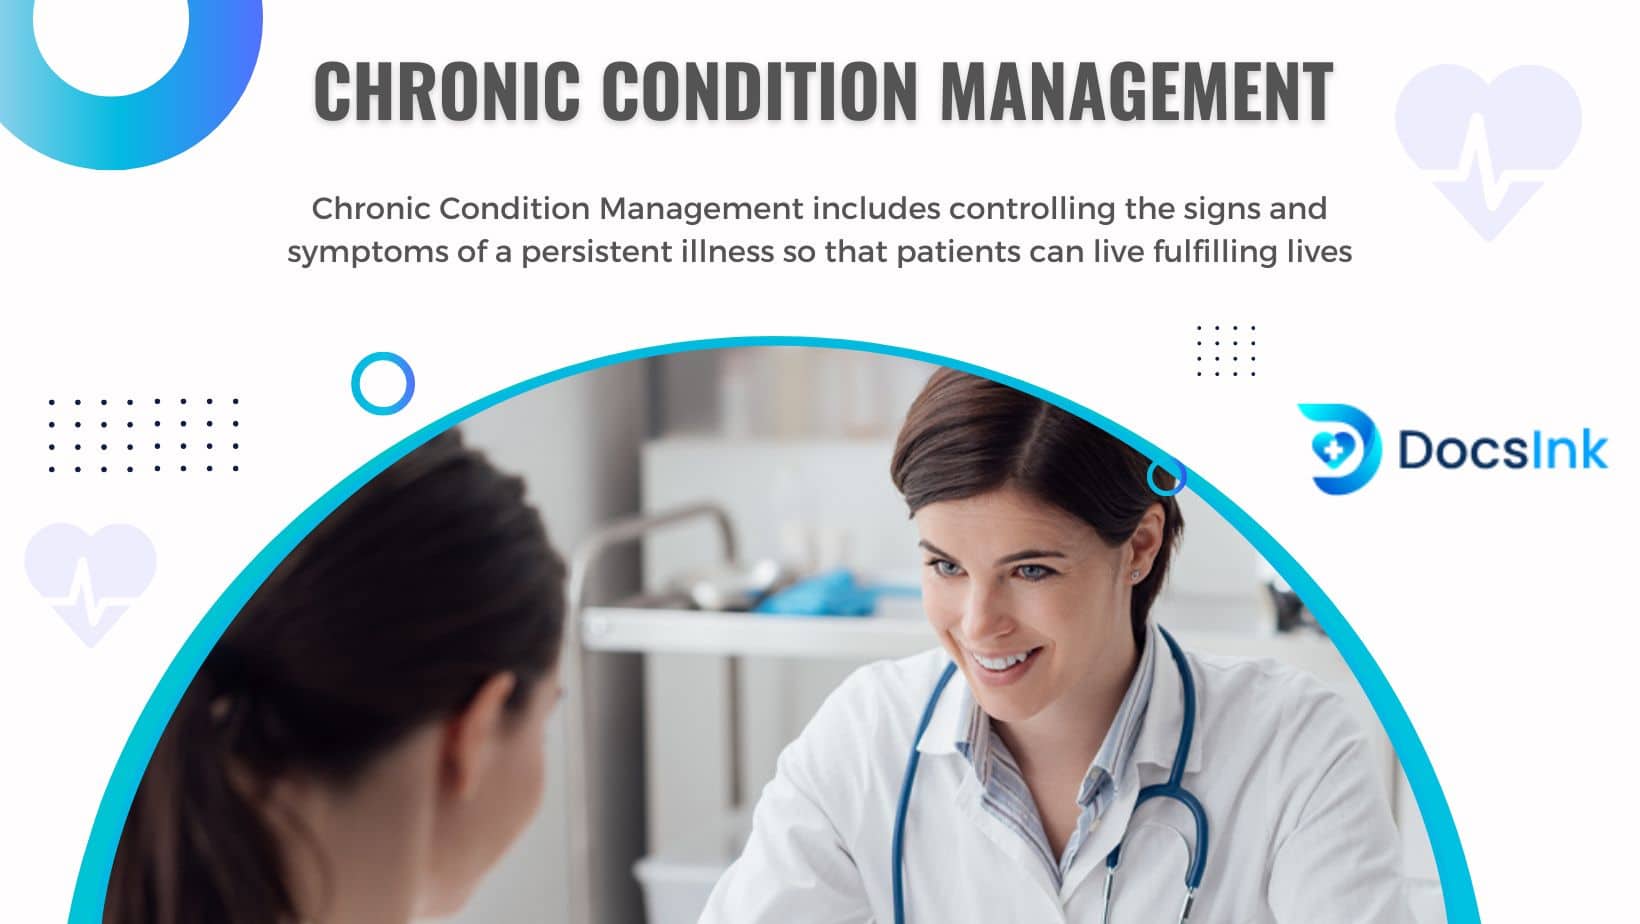 Chronic Care Management: A New Era For Primary Careccm, chronic care management, best chronic care management software, best chronic care management providers, chronic care management companies, chronic care management solution